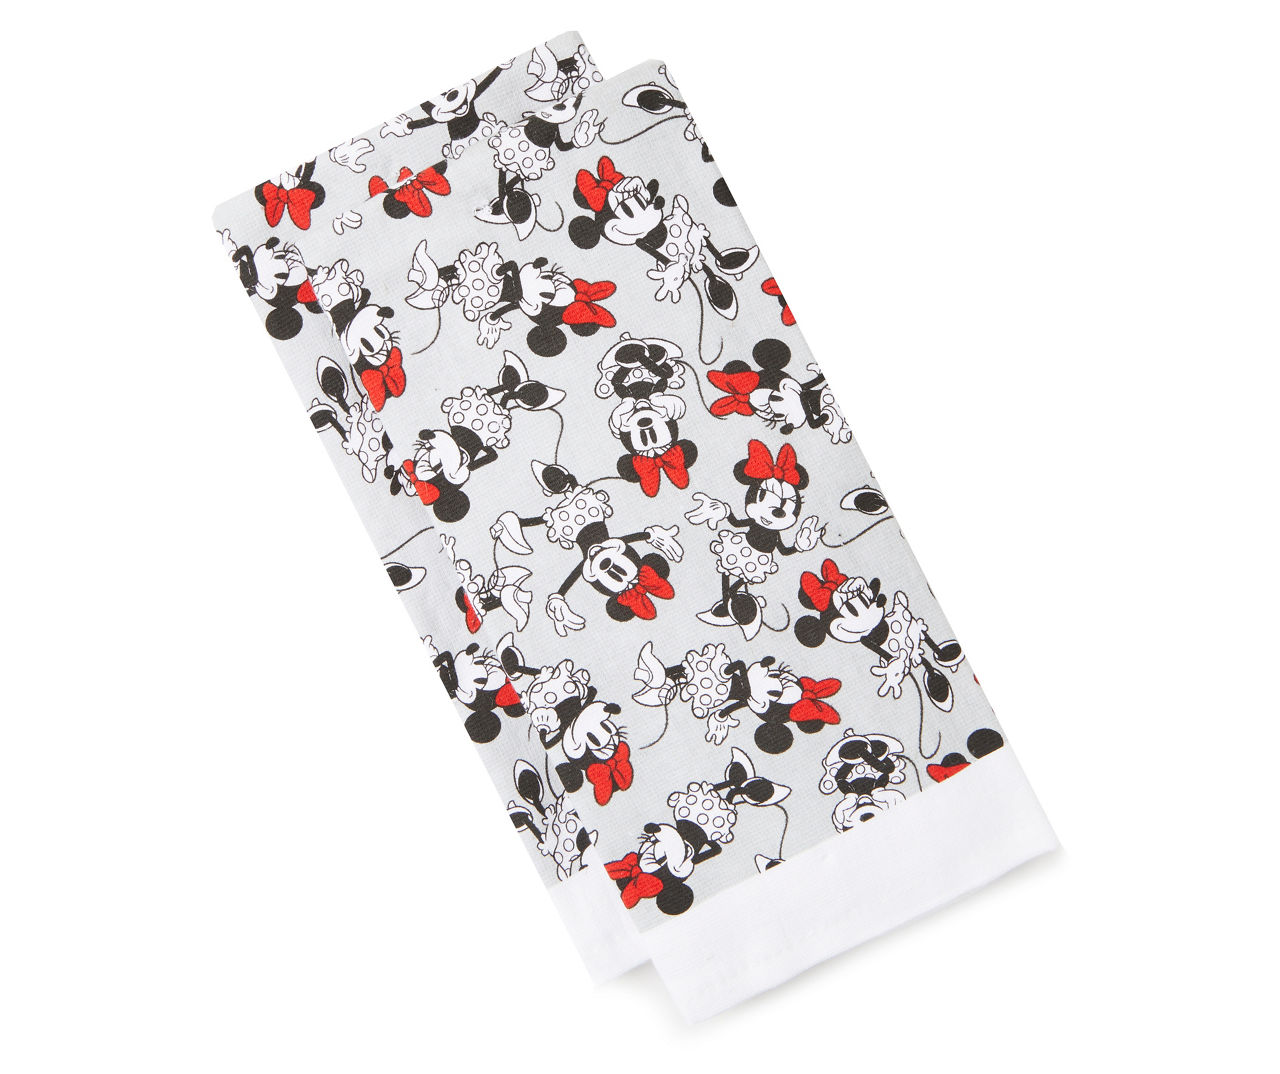 Disney 100% Cotton Kitchen Towels, 2 Pack, 16 x 28 Inches - Minnie & Mickey  Kissing 